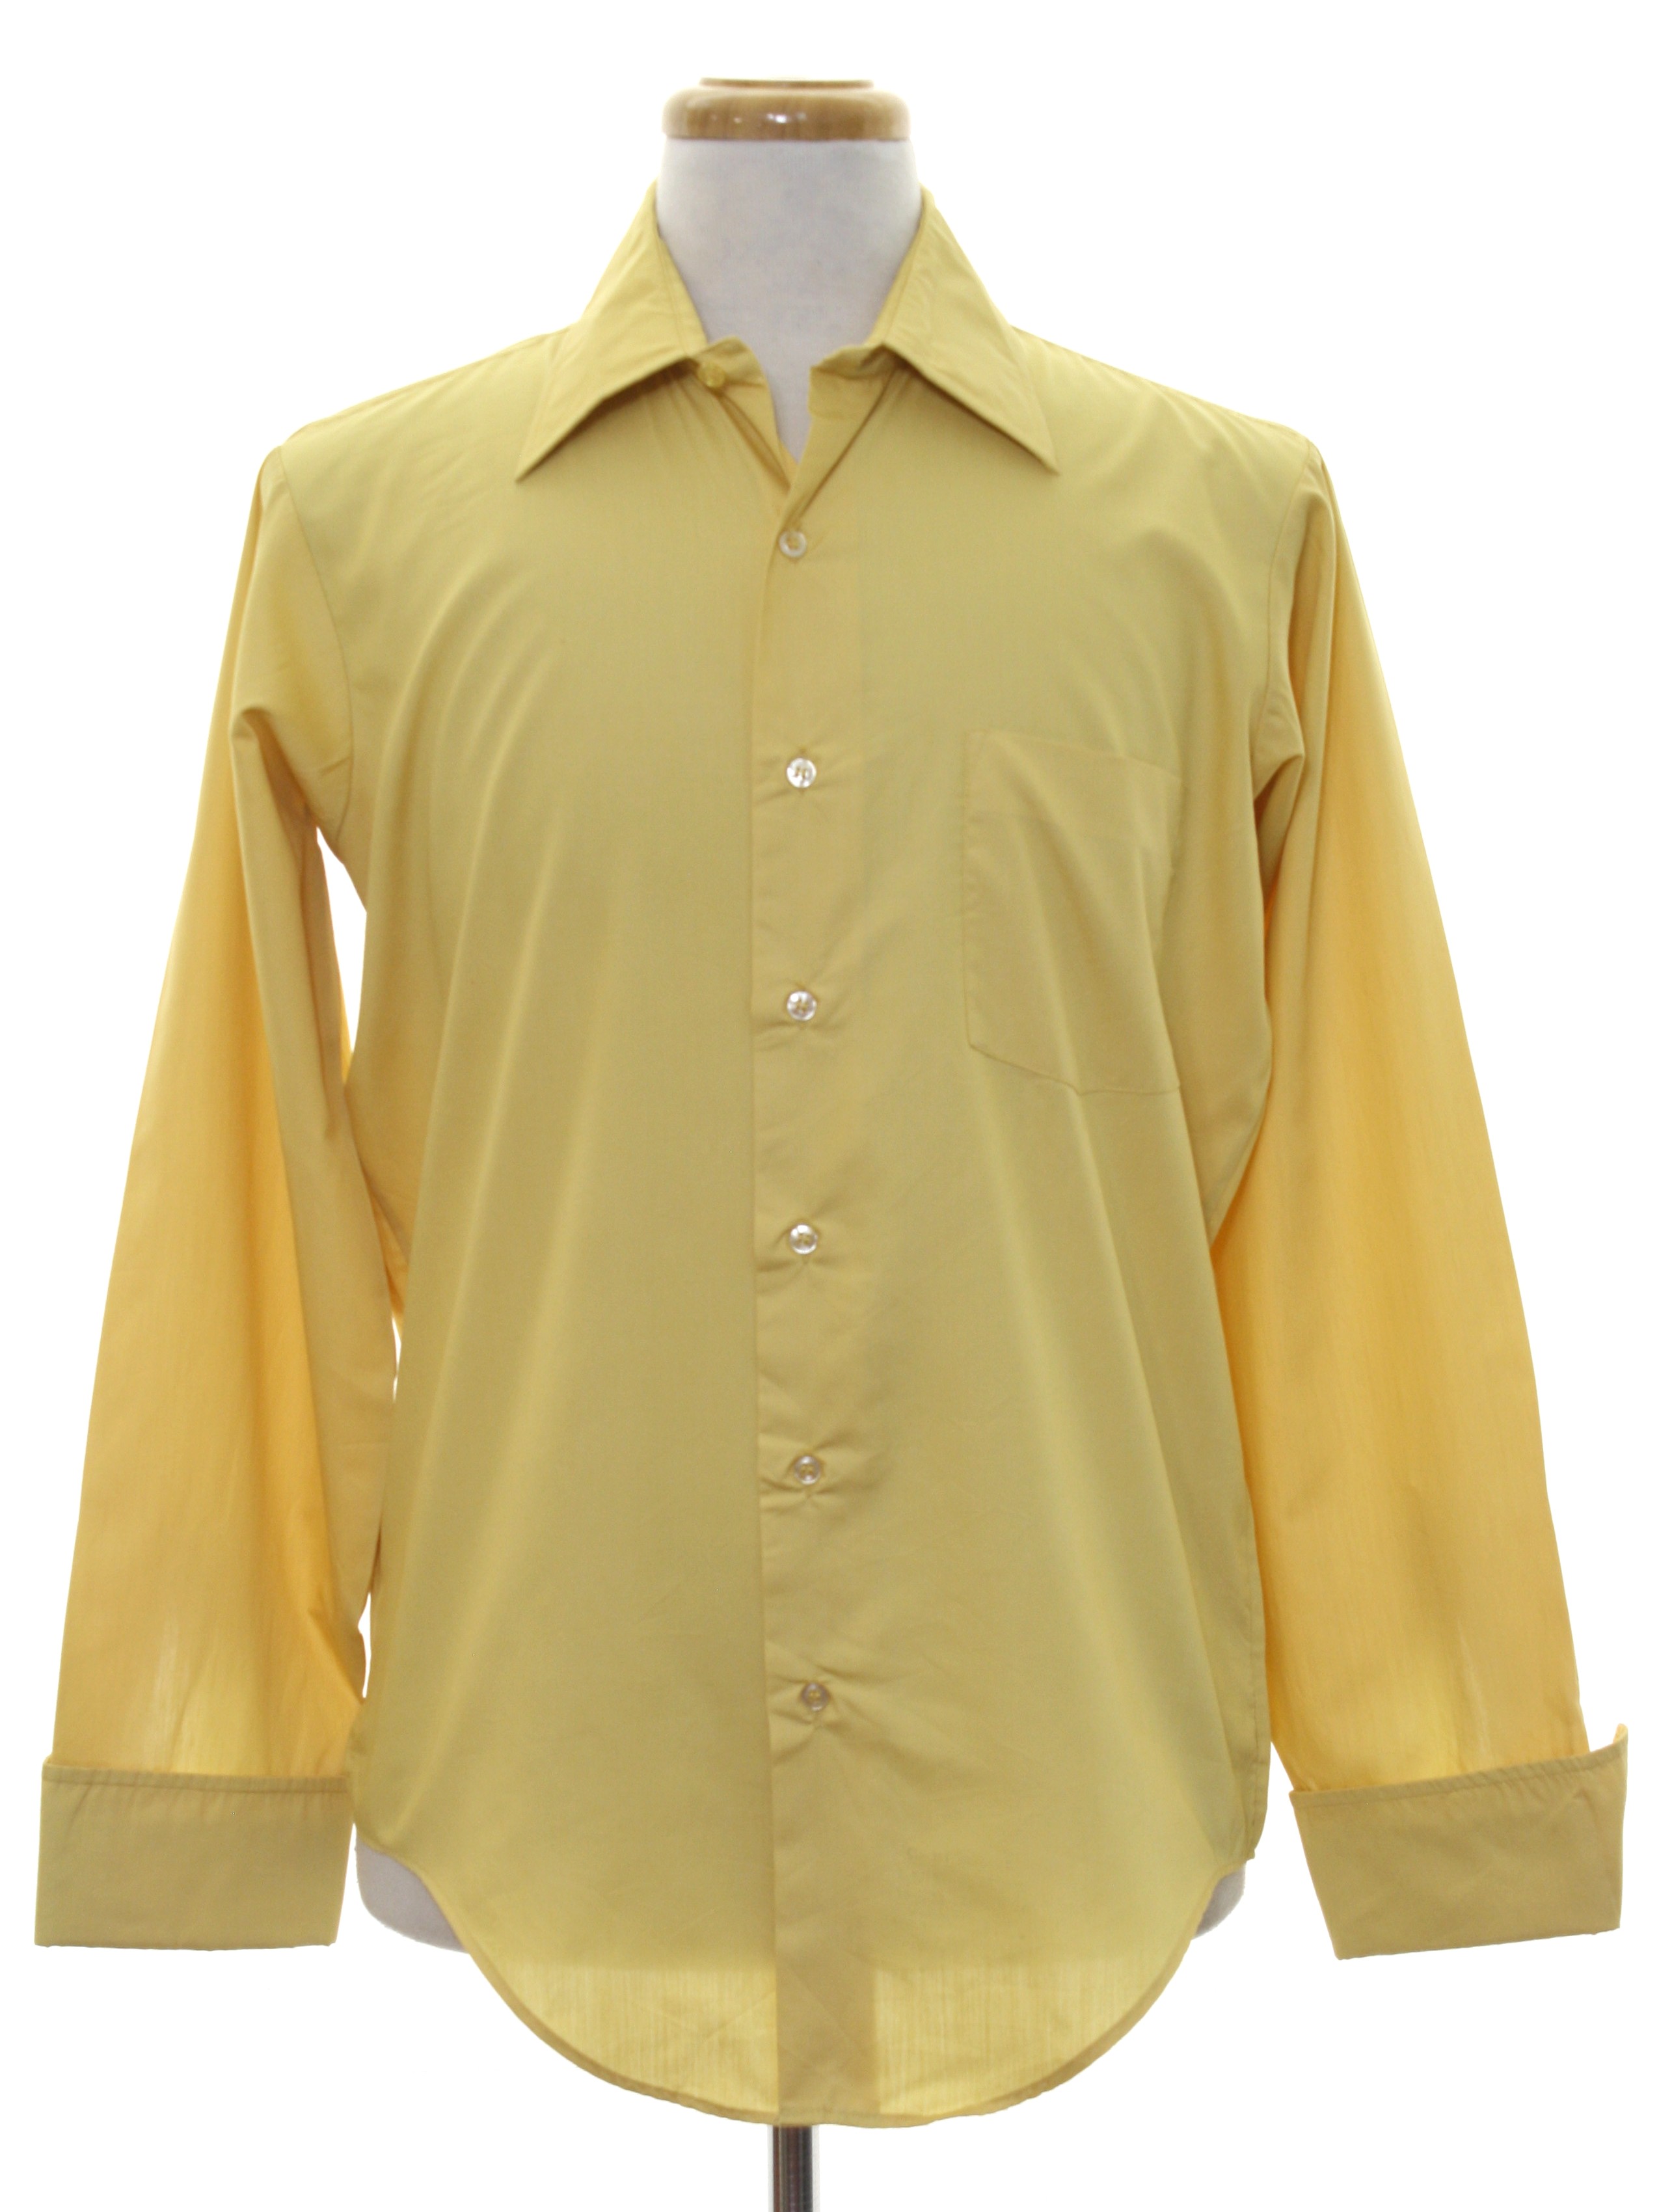 60s Vintage Manhattan Custom Limited Shirt: Late 60s or early 70s ...